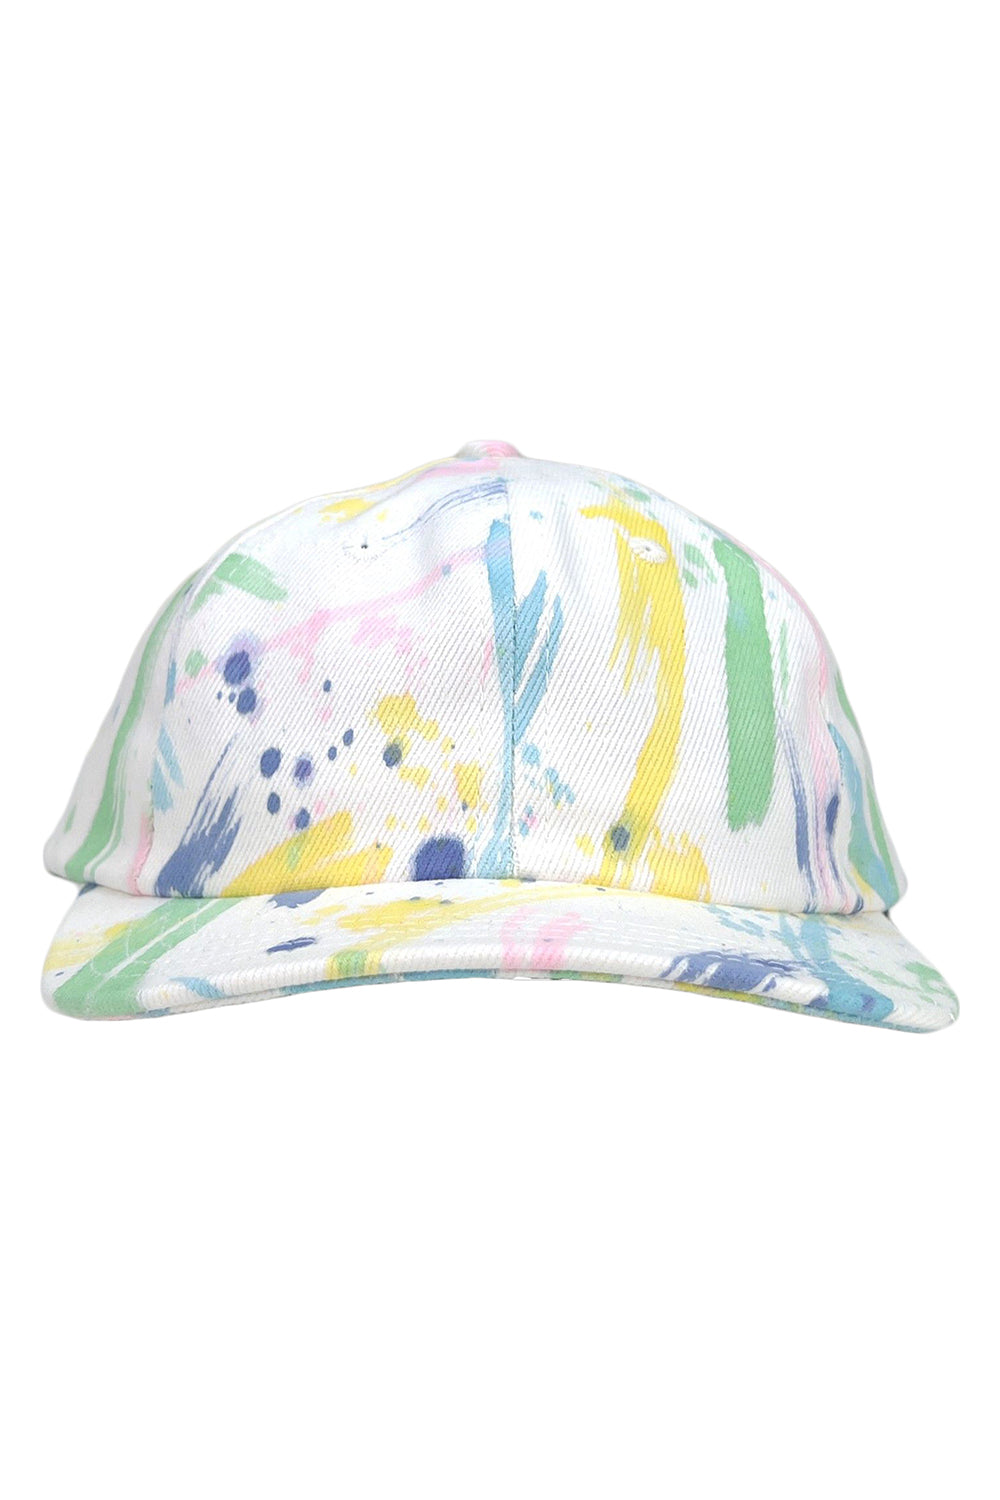 Abstract Chenga Cap | Jungmaven Hemp Clothing & Accessories / color: Blue/Green/Pink/Yellow